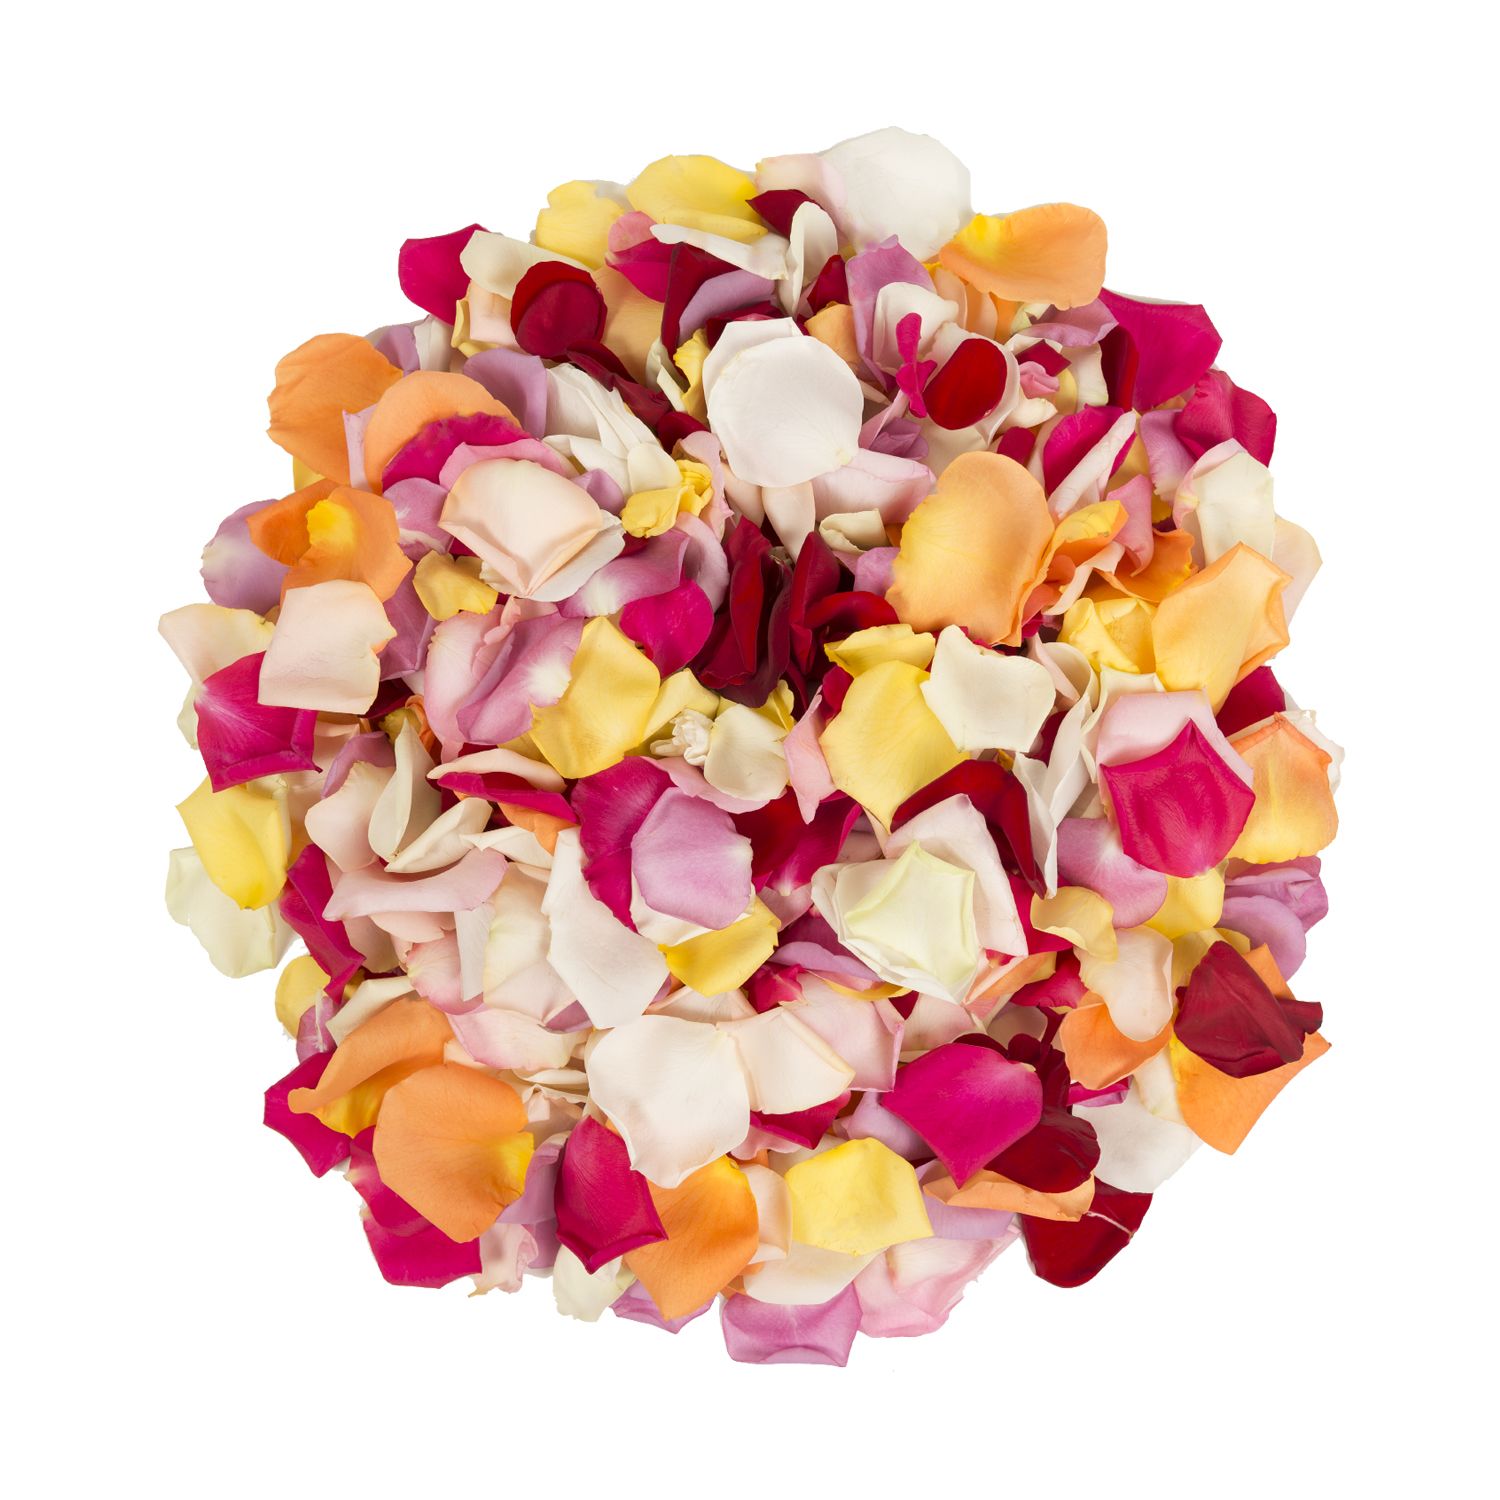 Dried Mix Edible Flowers, Rainbow Mix, Dried Rose Petals, Mix